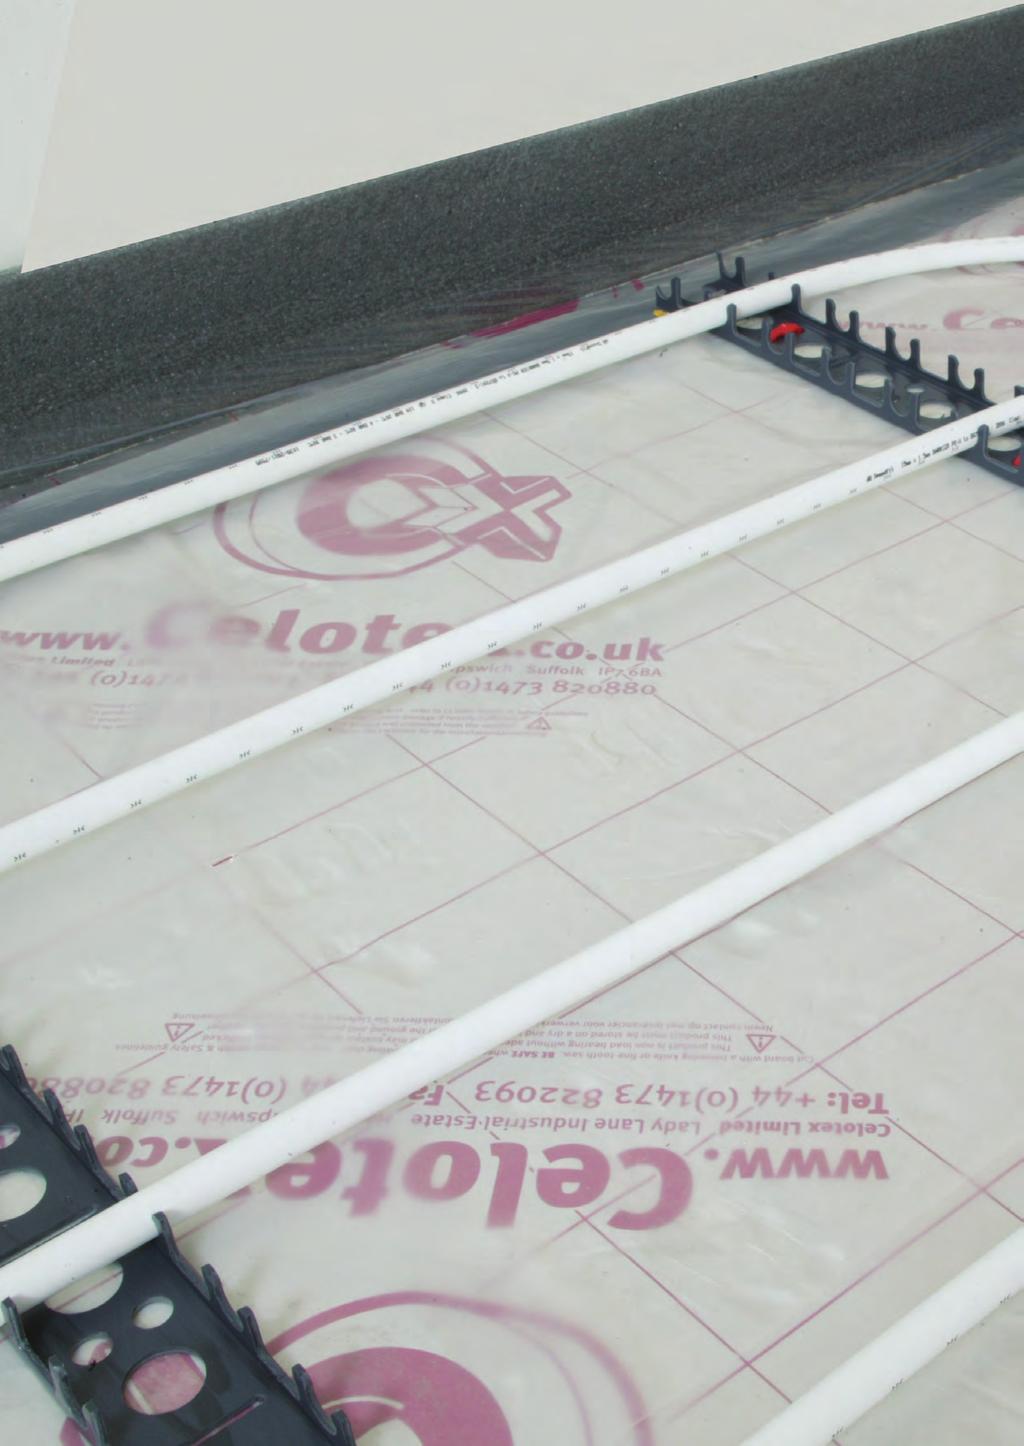 JG System Selector The JG Speedfit Underfloor Heating system offers a range of products to ensure that a wide variety of project types and sizes can be